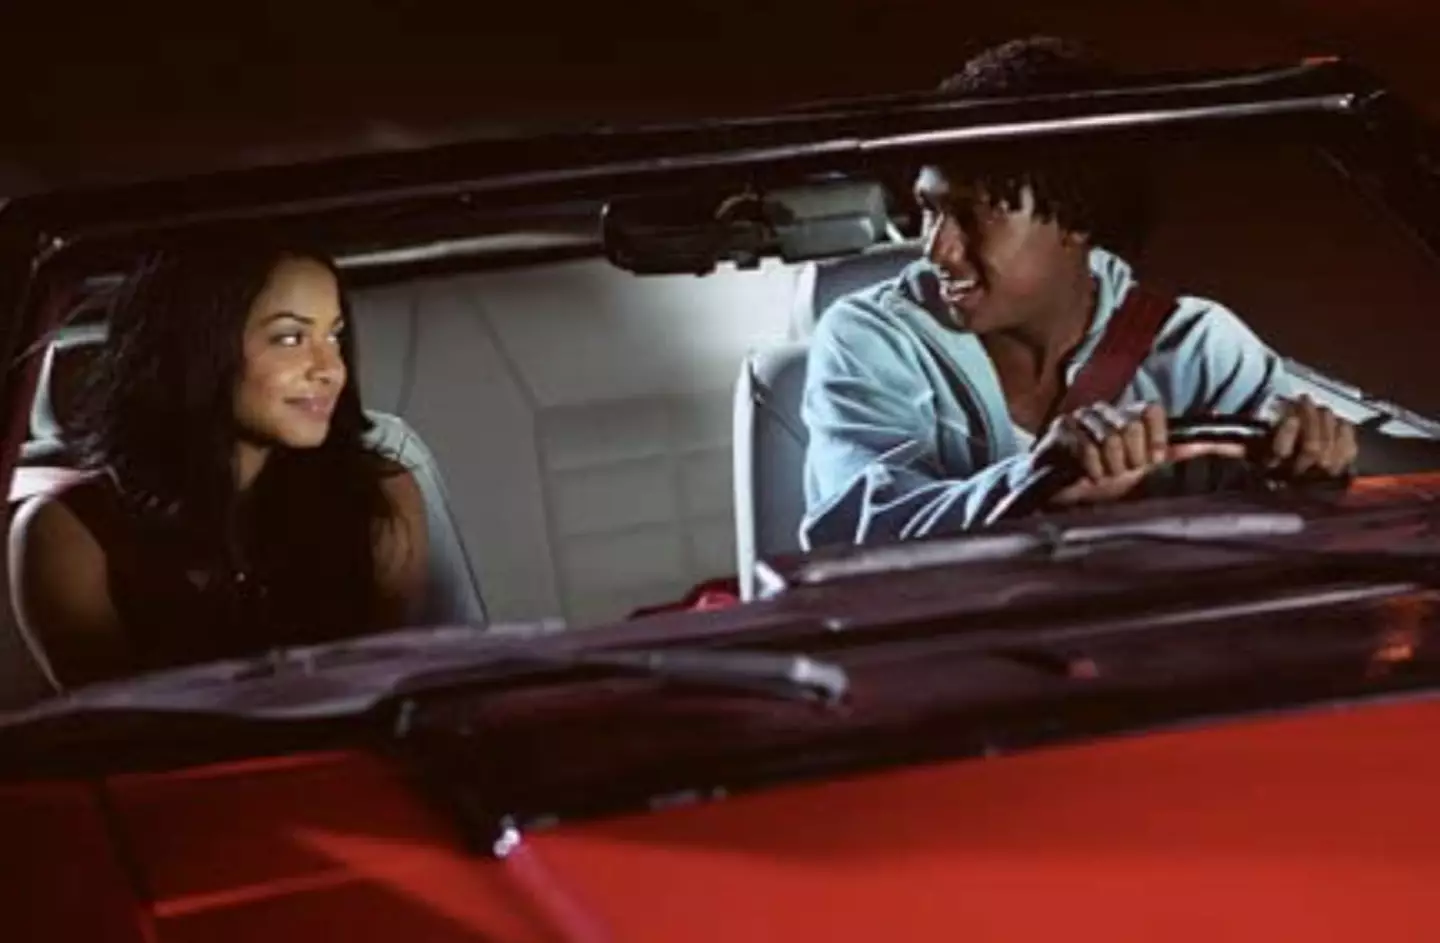 Christina Milian and Nick Cannon were co-stars on 'Love Don't Cost A Thing'.